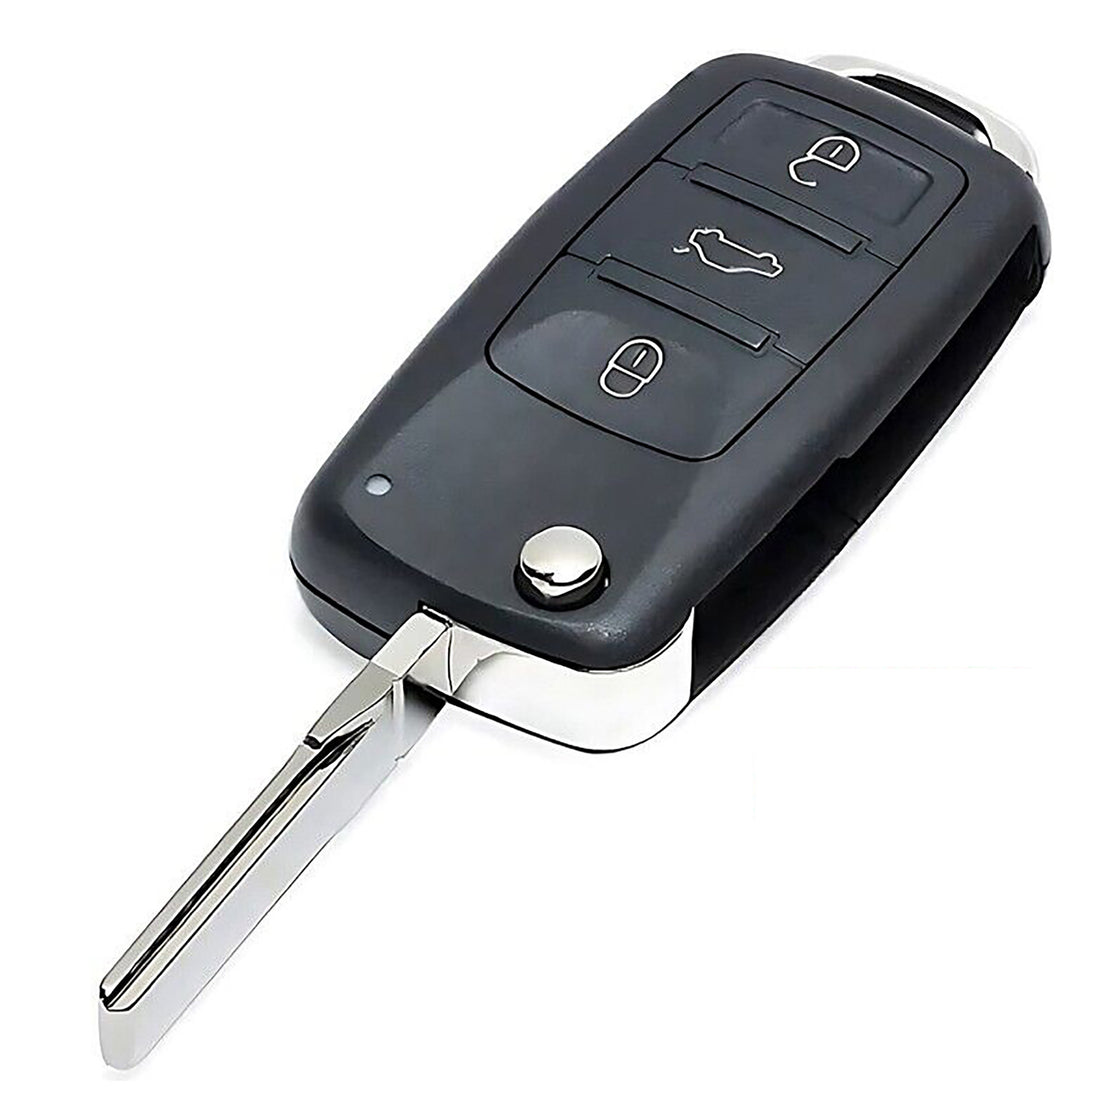 1x New Quality Replacement Proxy Key Fob Remote Compatible with & Fit For Volkswagen VW Vehicle - MPN NBG010206T-02